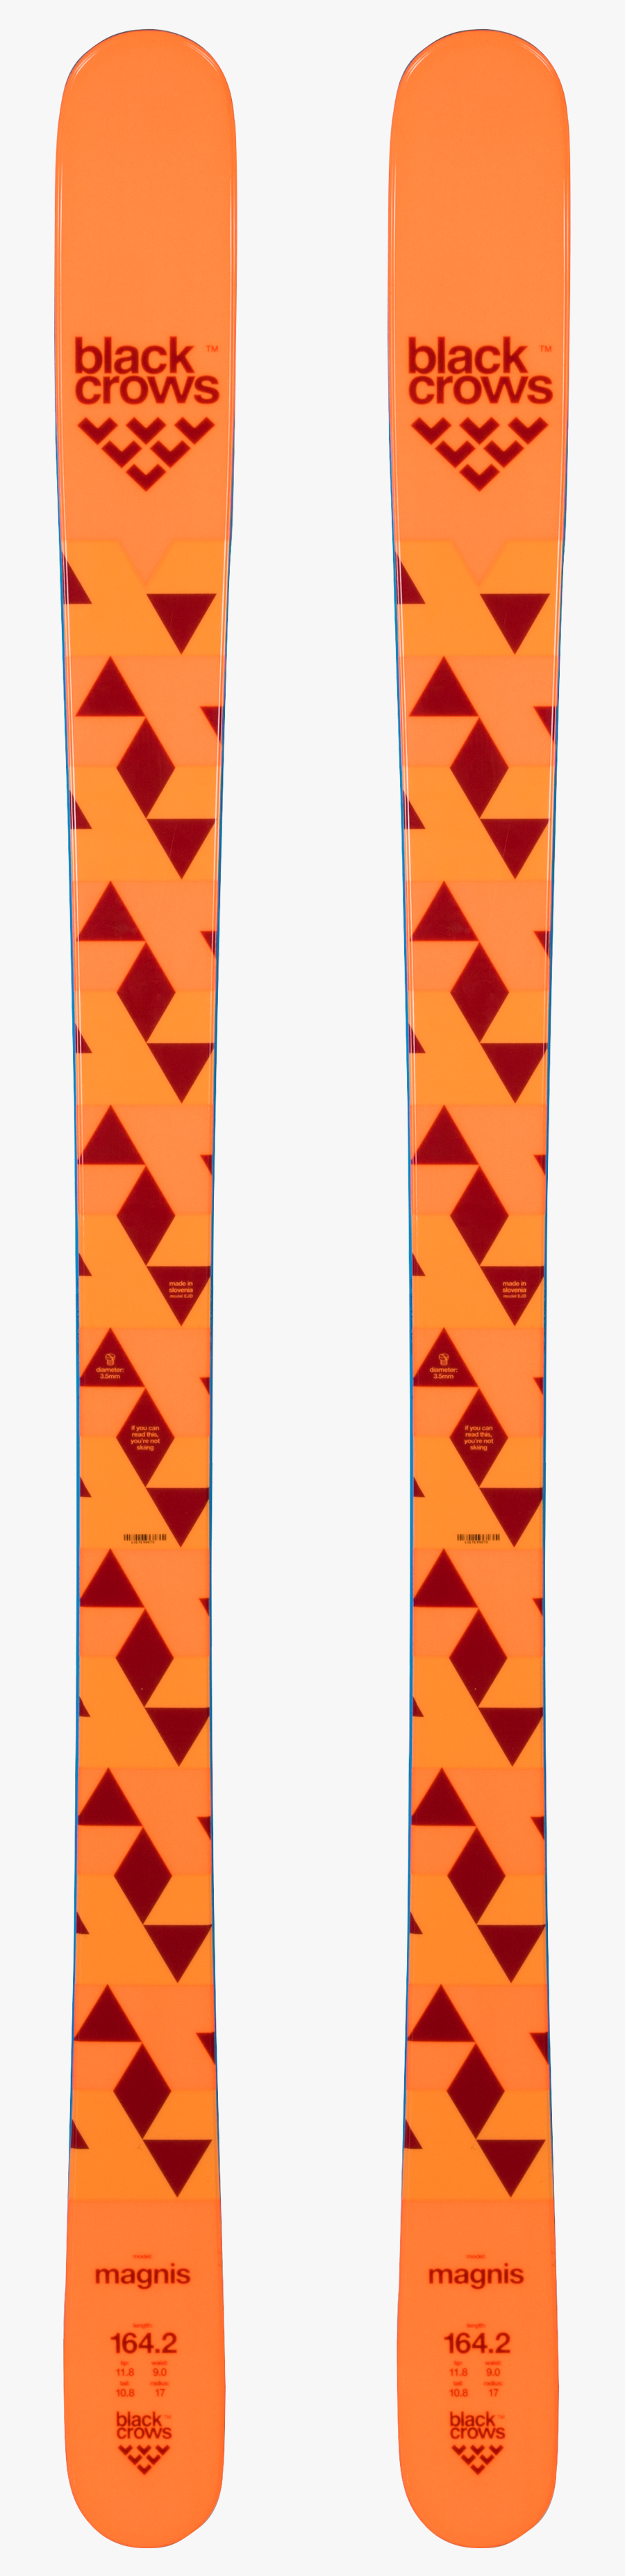 Pair Of Skis Clipart, Transparent Clipart